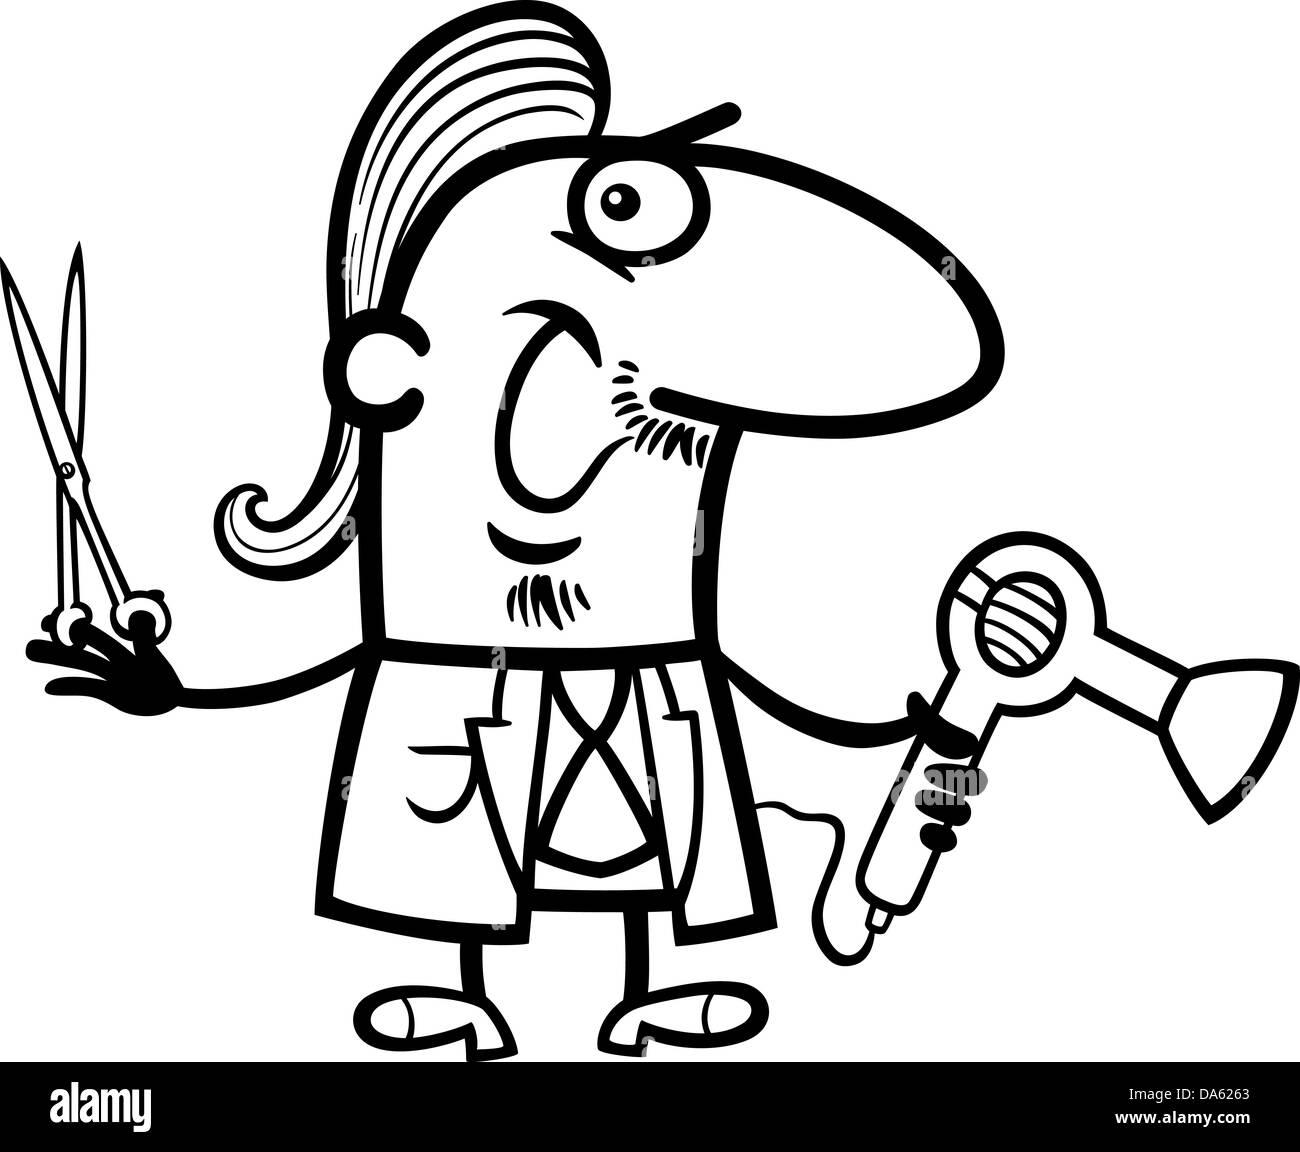 Black and White Cartoon Illustration of Funny Hairdresser or Barber with Scissors and Hair Dryer Profession Occupation Stock Photo